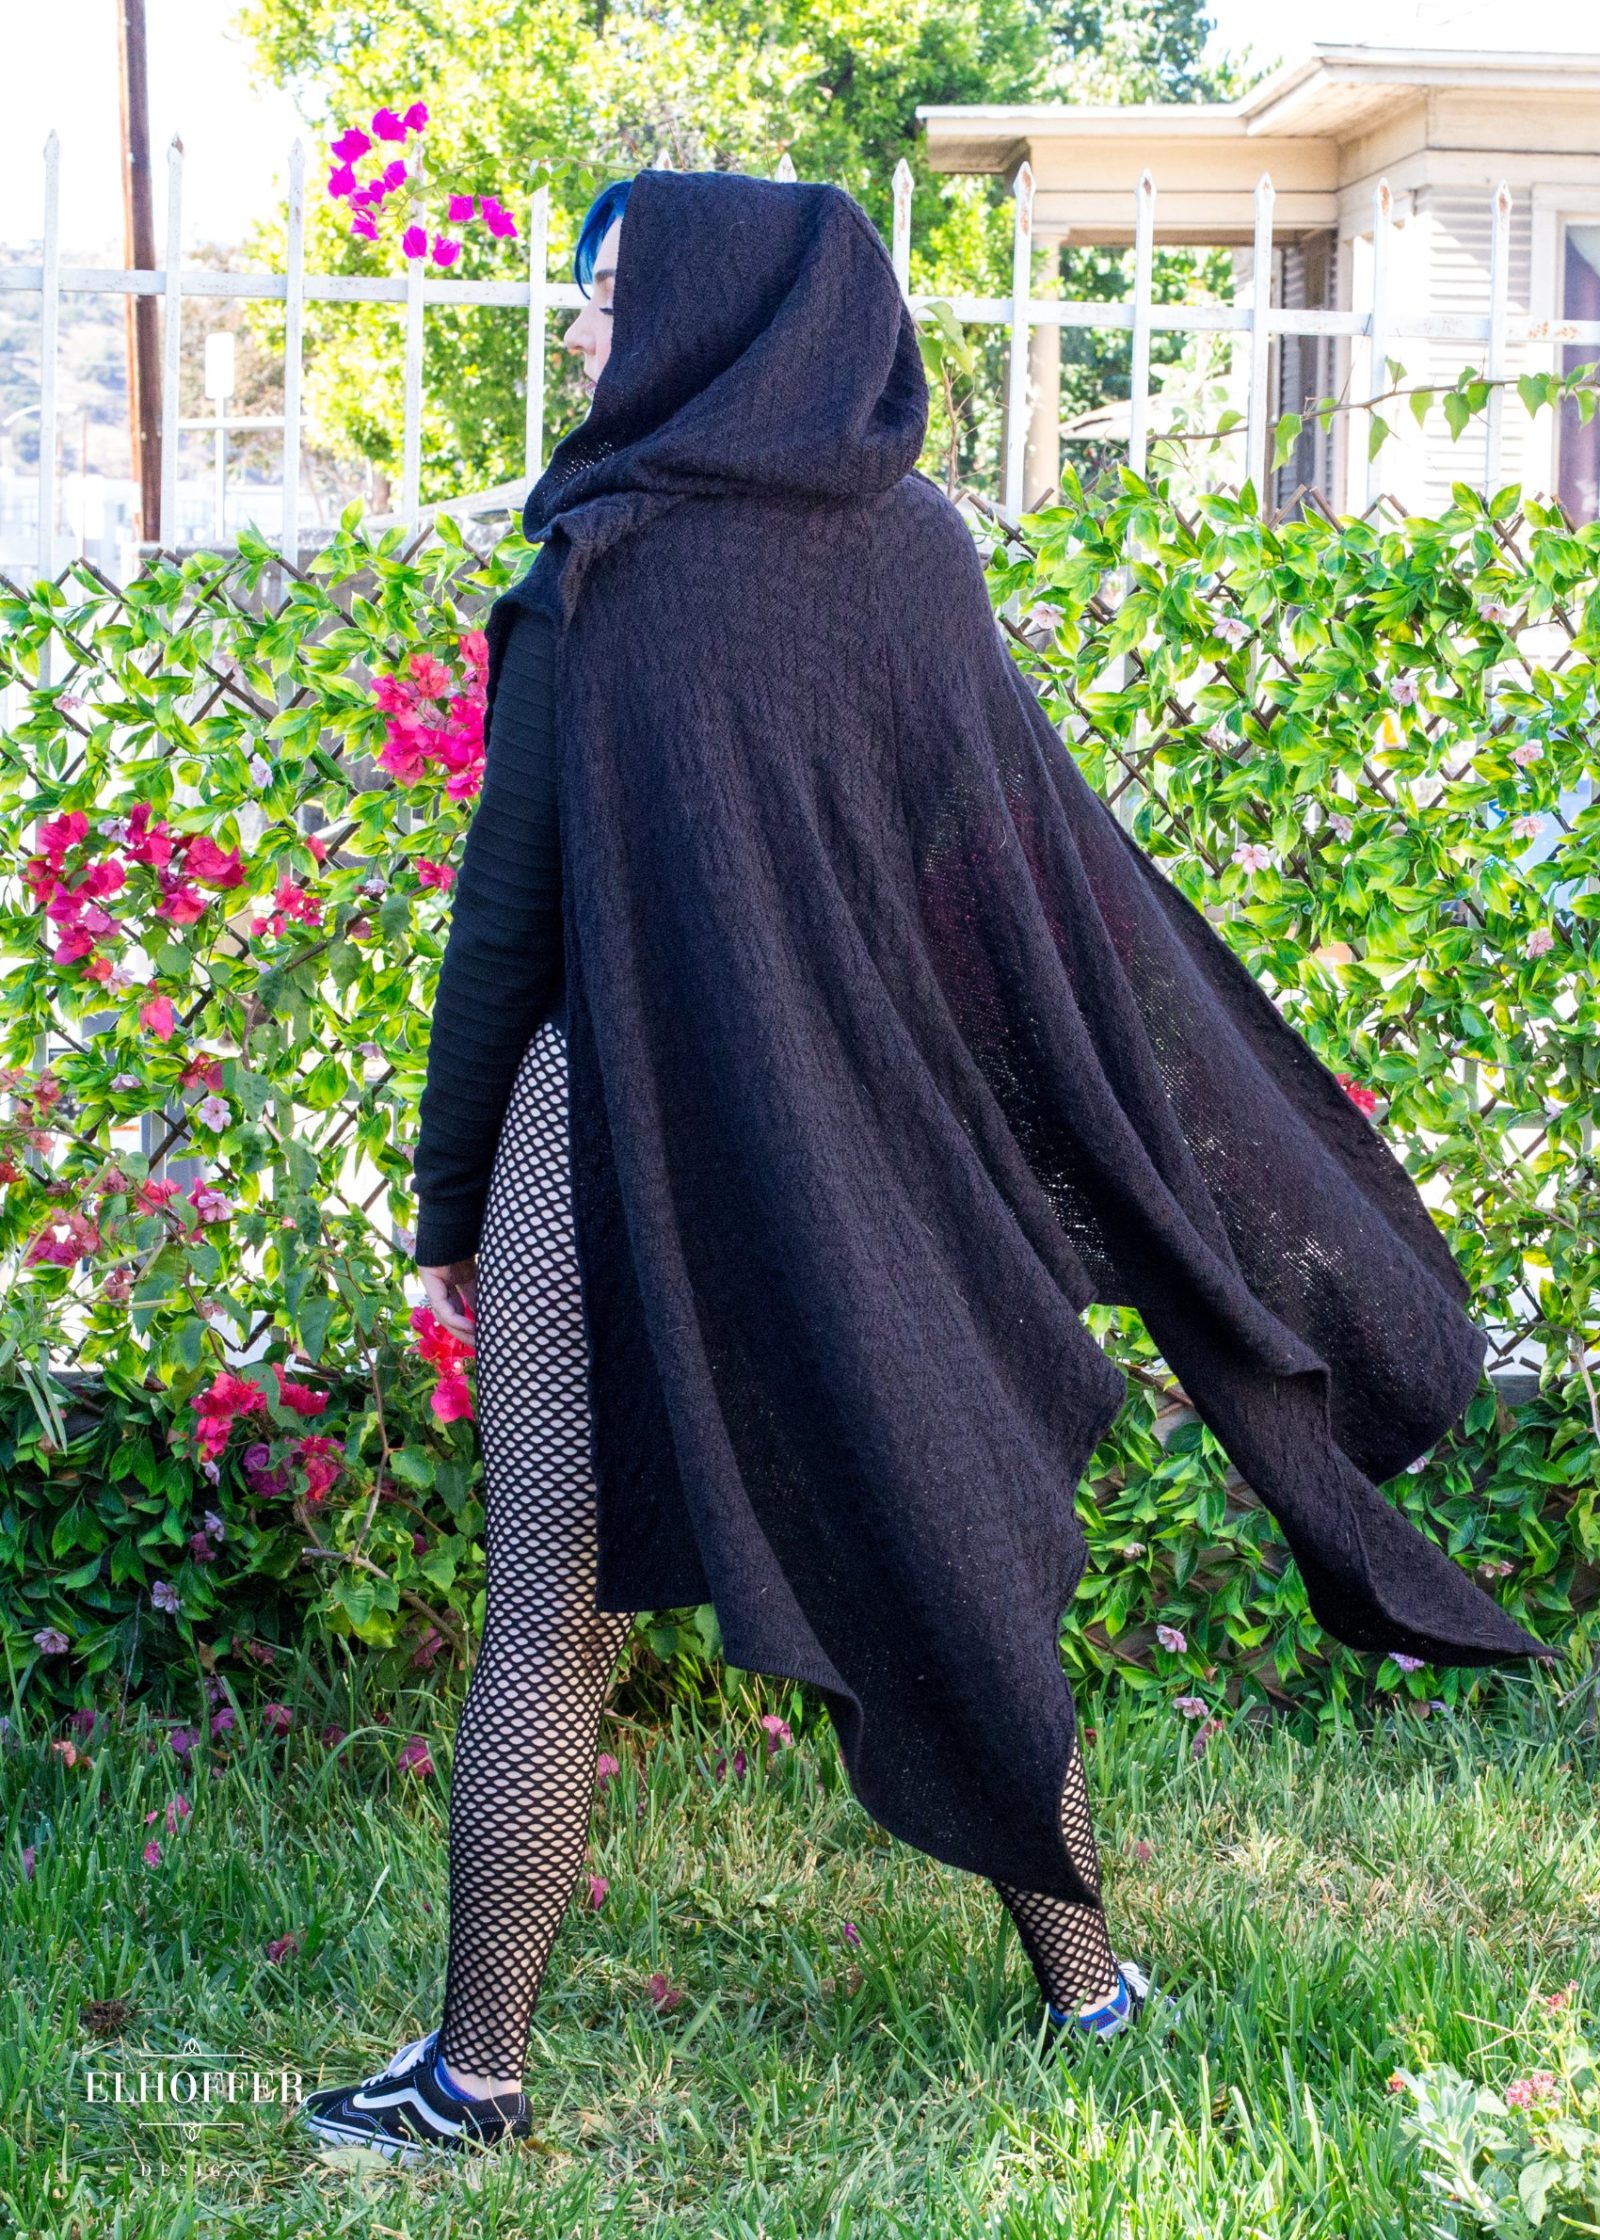 Star Wars Kylo Ren Inspired Galactic Renegade Tunic and Cape by Elhoffer Design